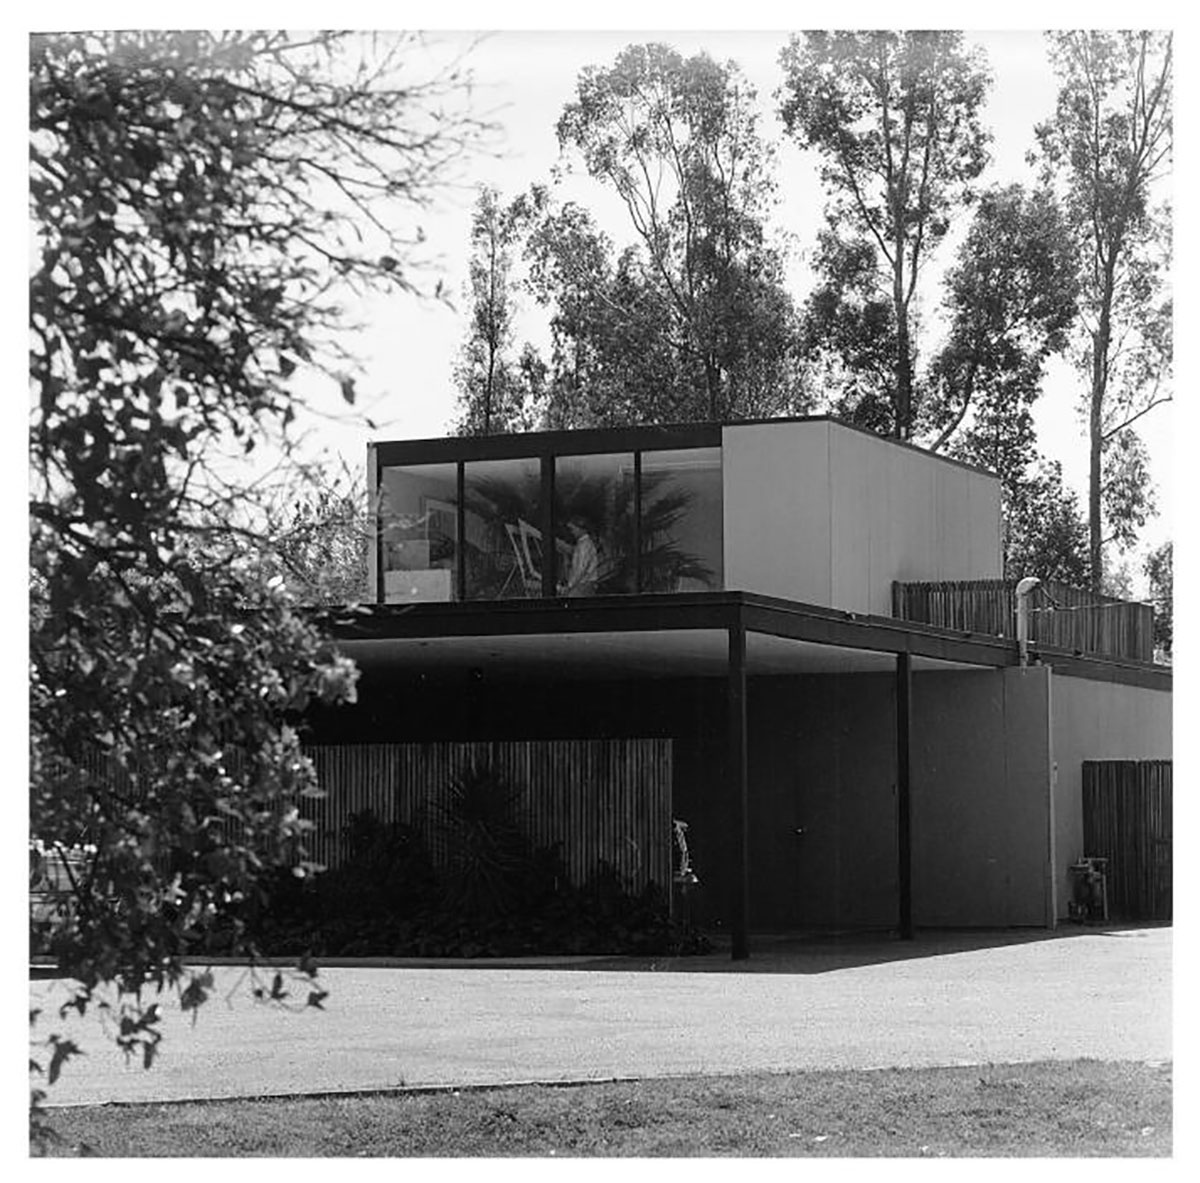 Frerichs House by Allan and Olsson